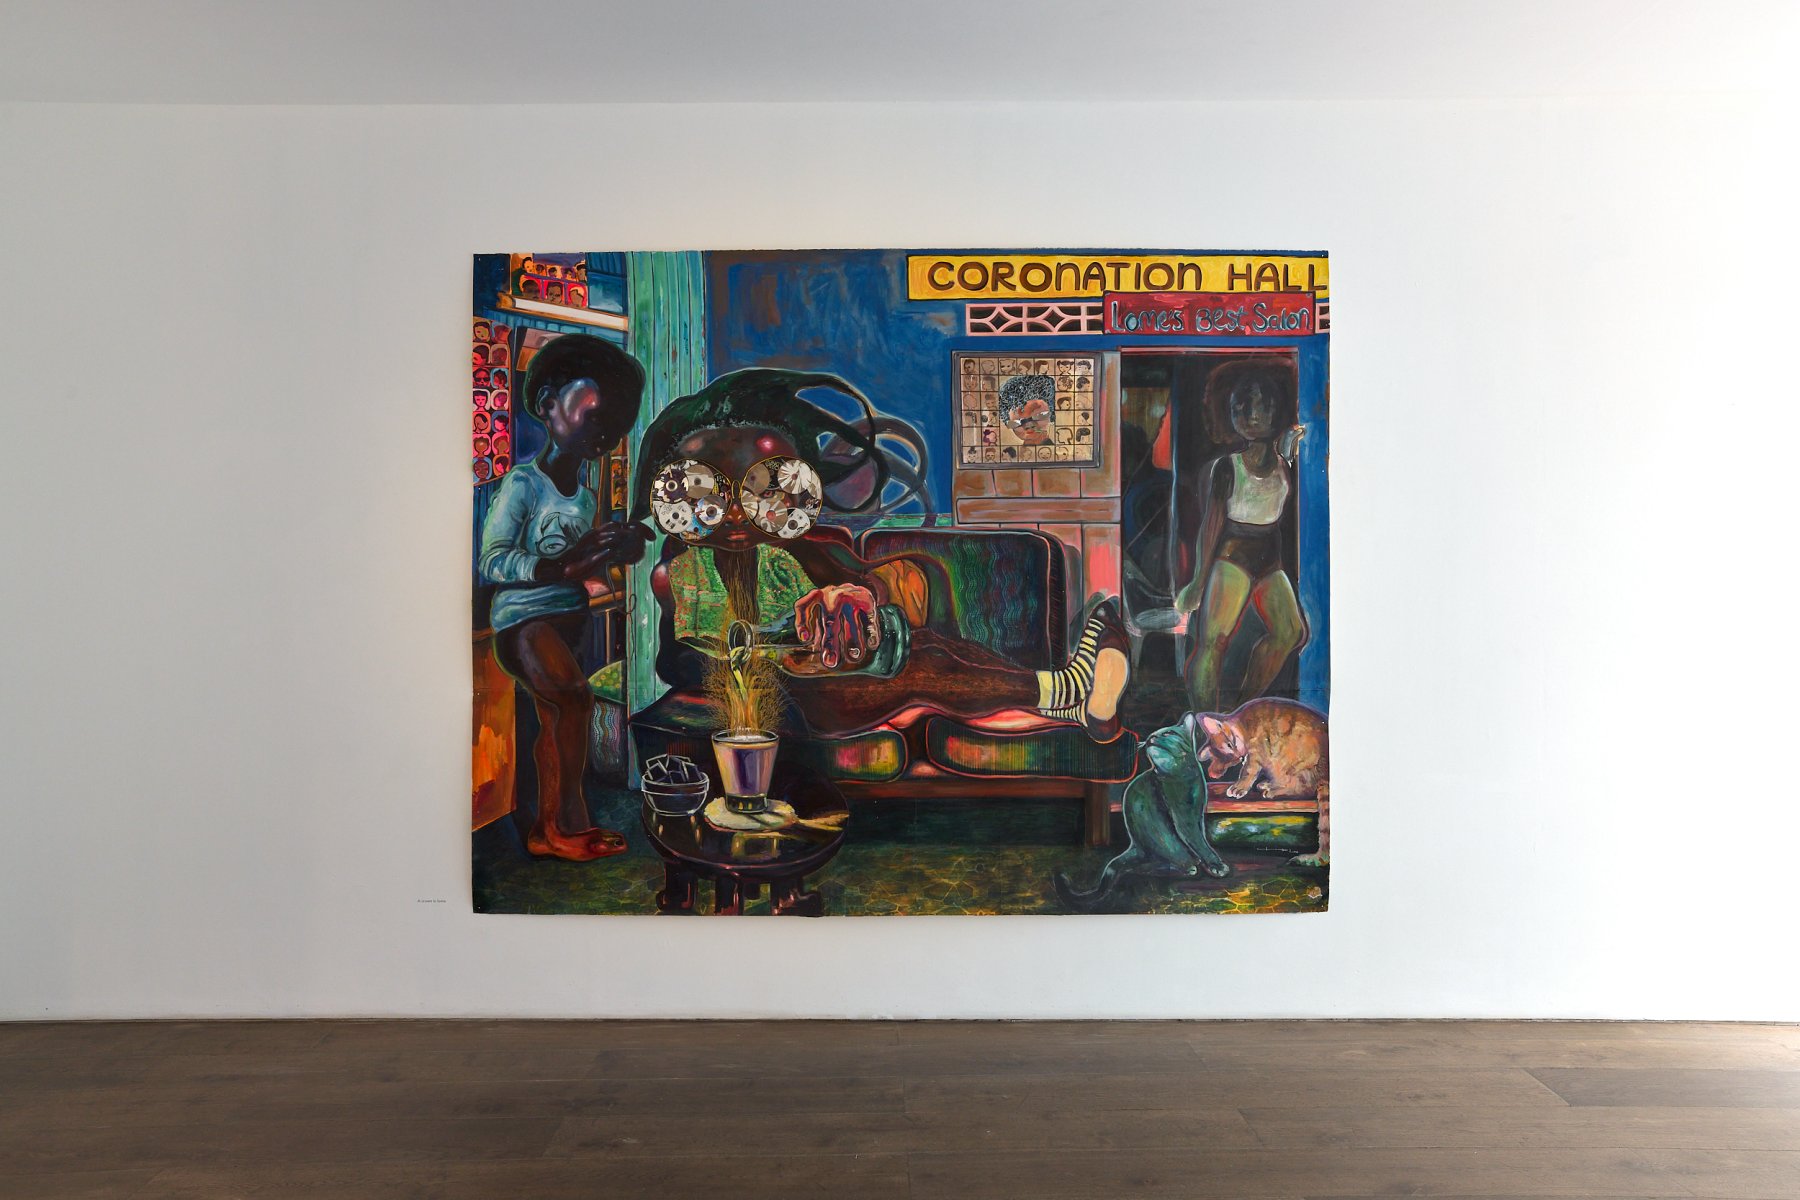 Installation image for Ndidi Emefiele: The Gift of Fellowship, at rosenfeld